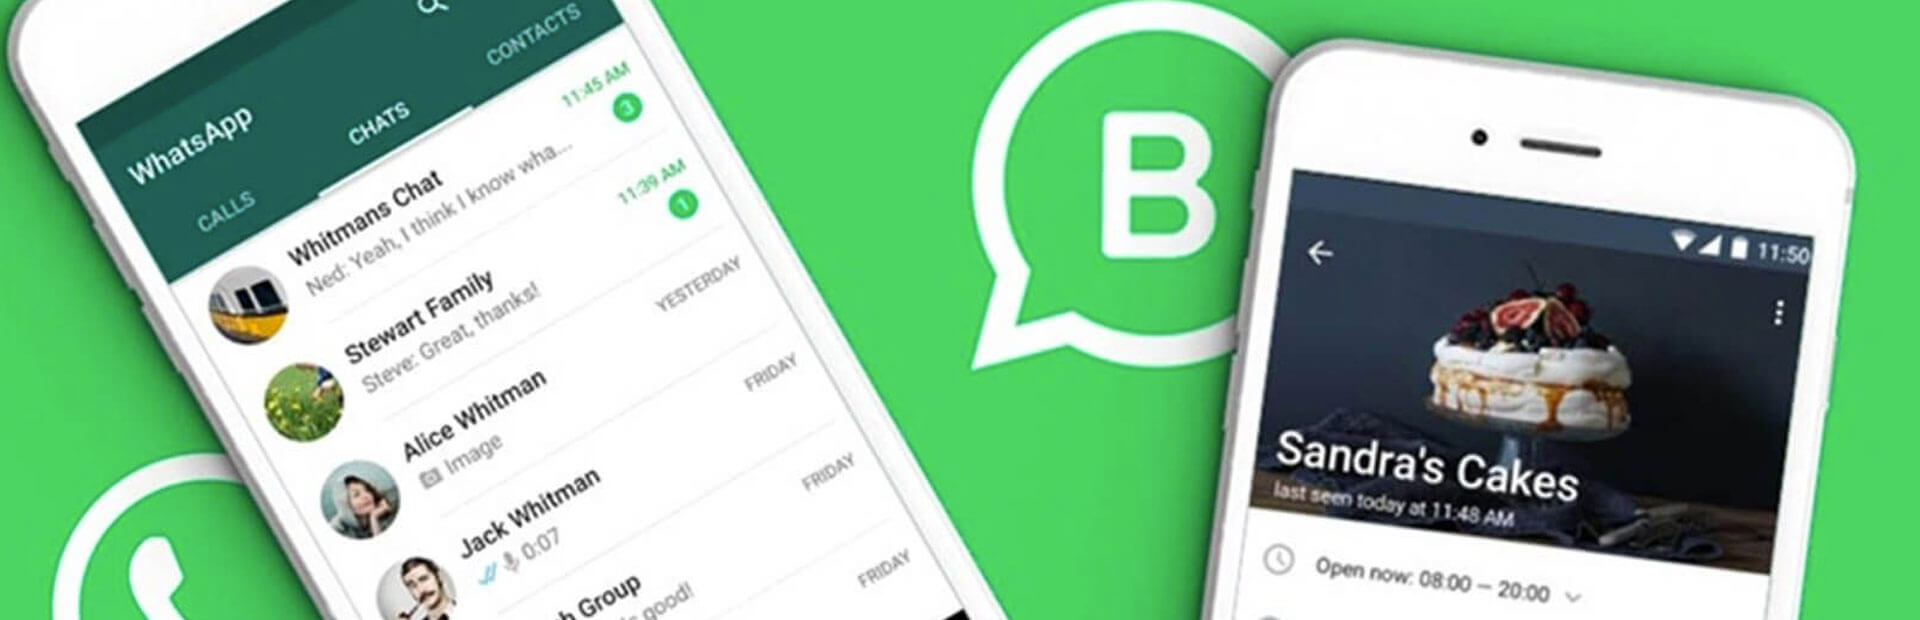 Whatsapp Marketing The New Way To Reach Your Customers User Growth